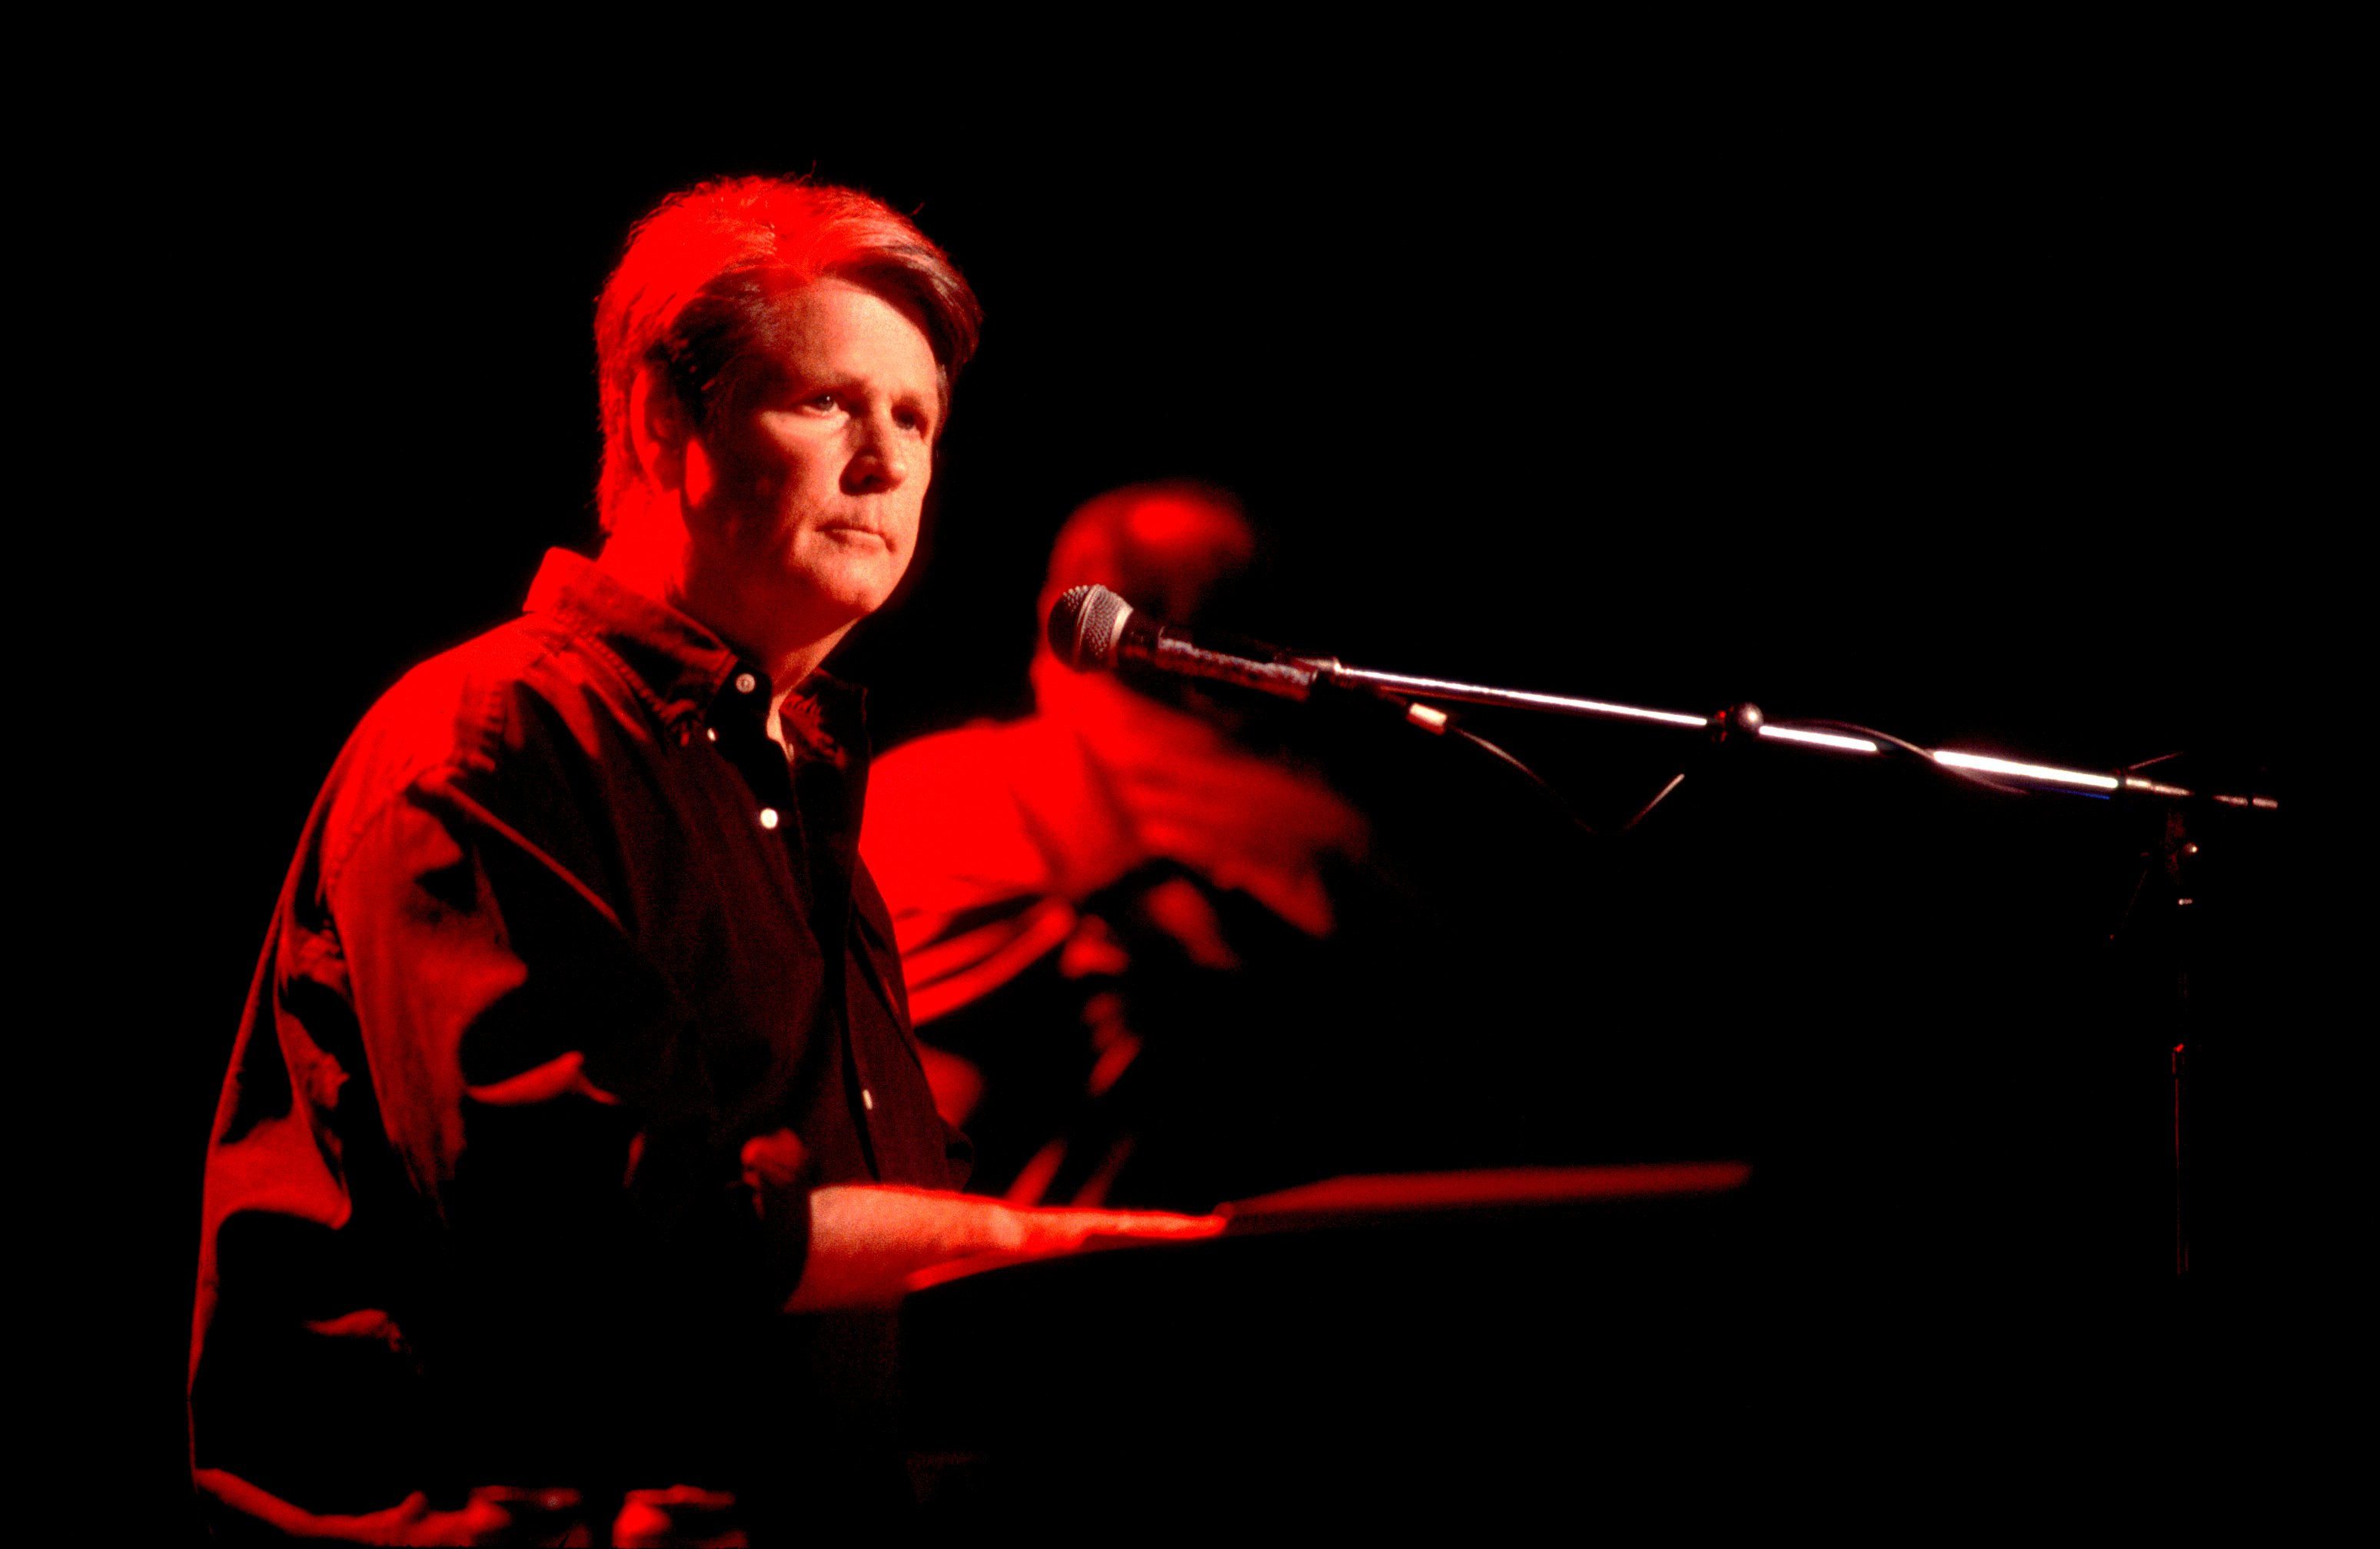 American Rock and Pop musician Brian Wilson plays keyboards as he performs